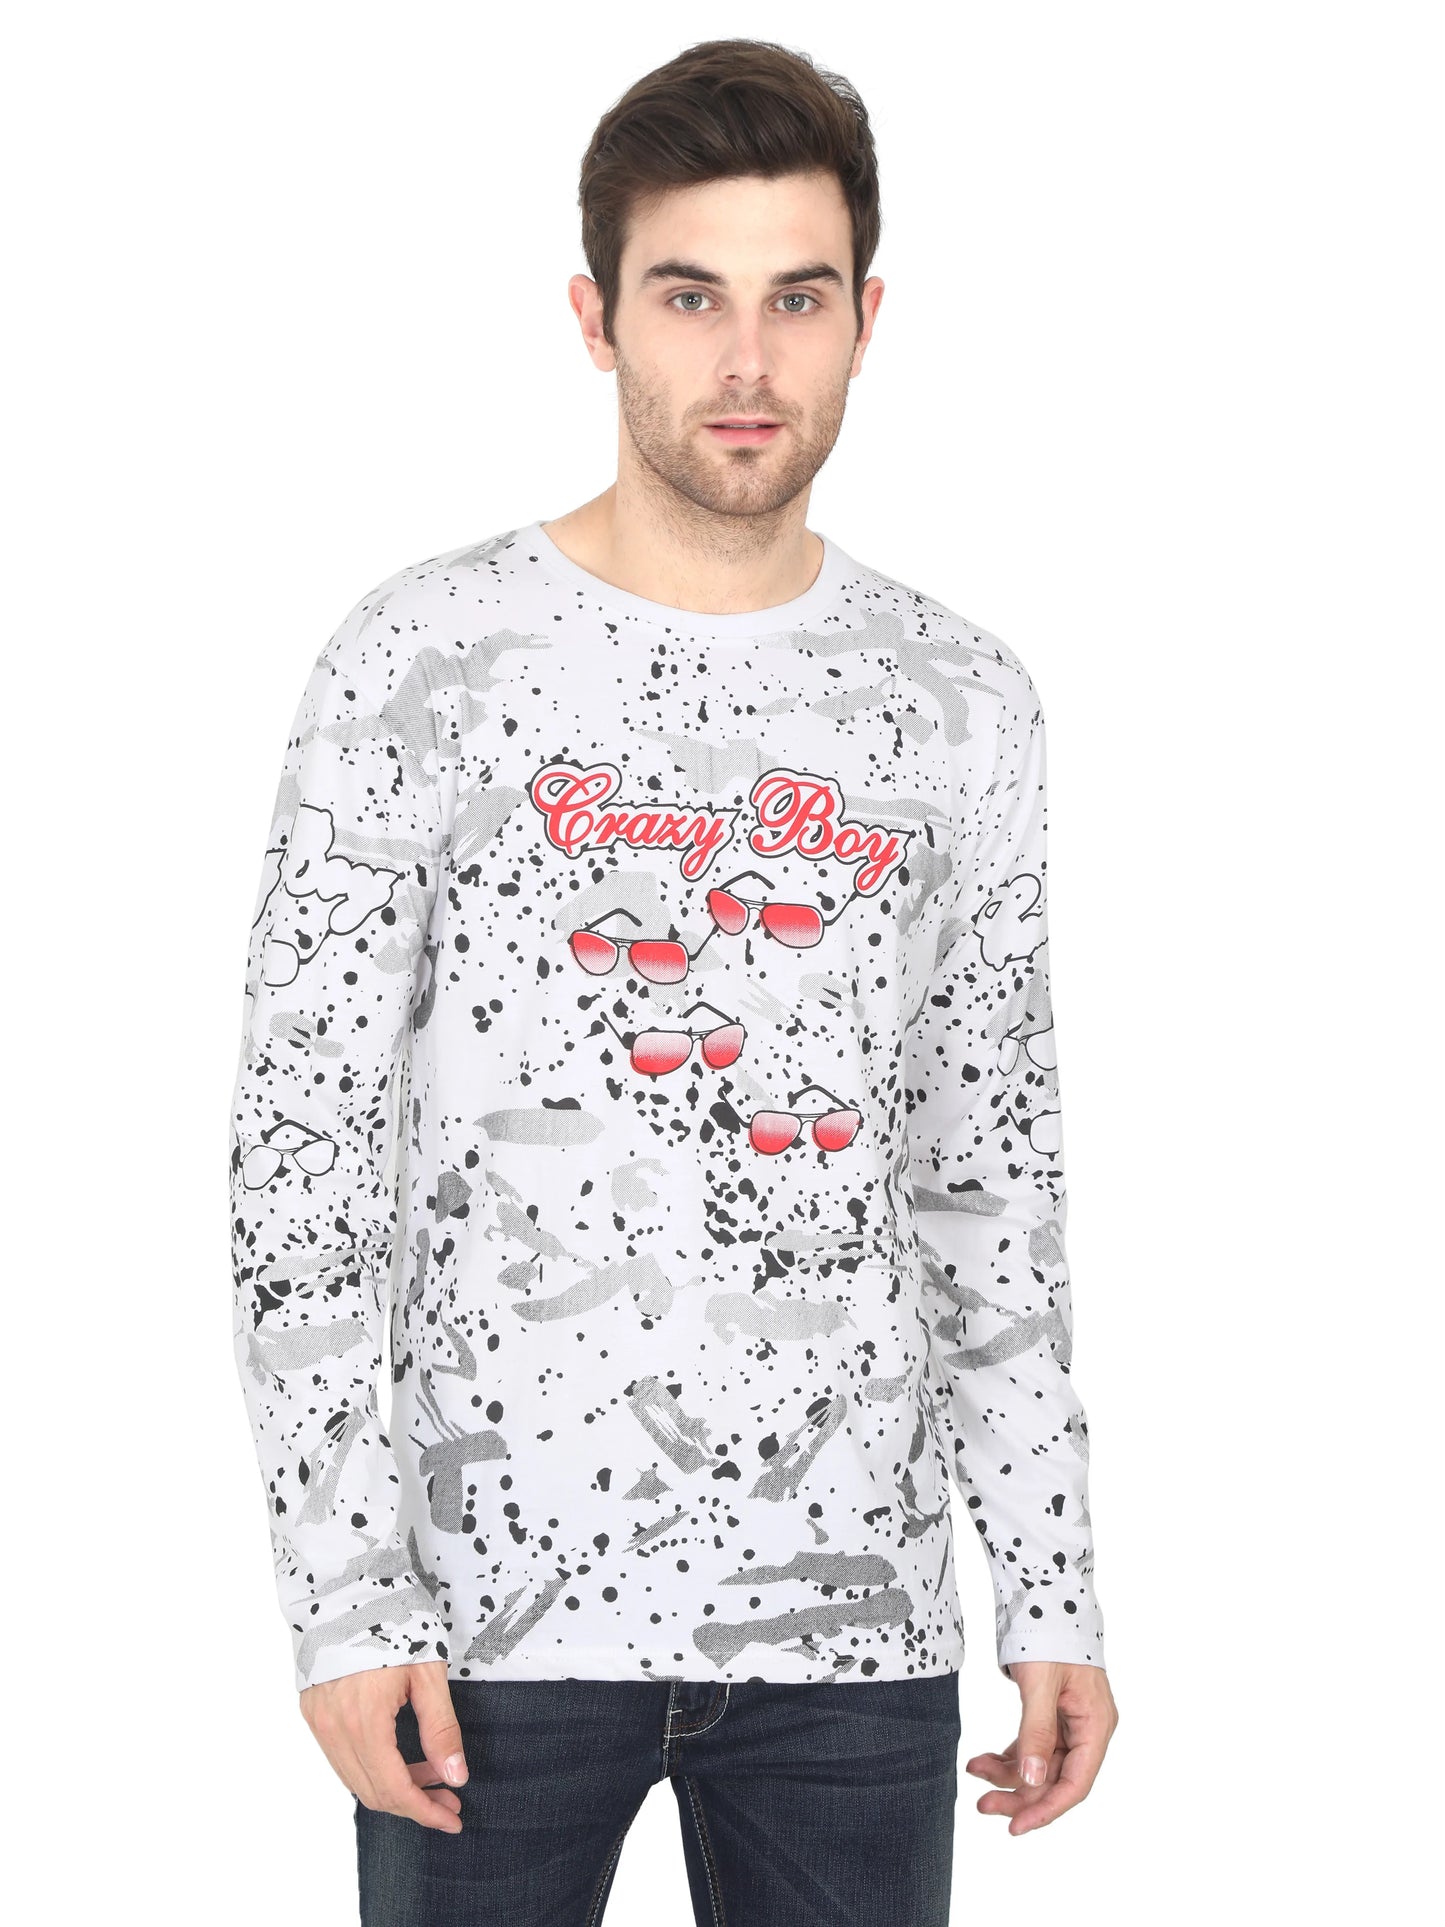 Men's Cotton Round Neck Full Sleeve All Over Printed T-Shirt - Fleximaa